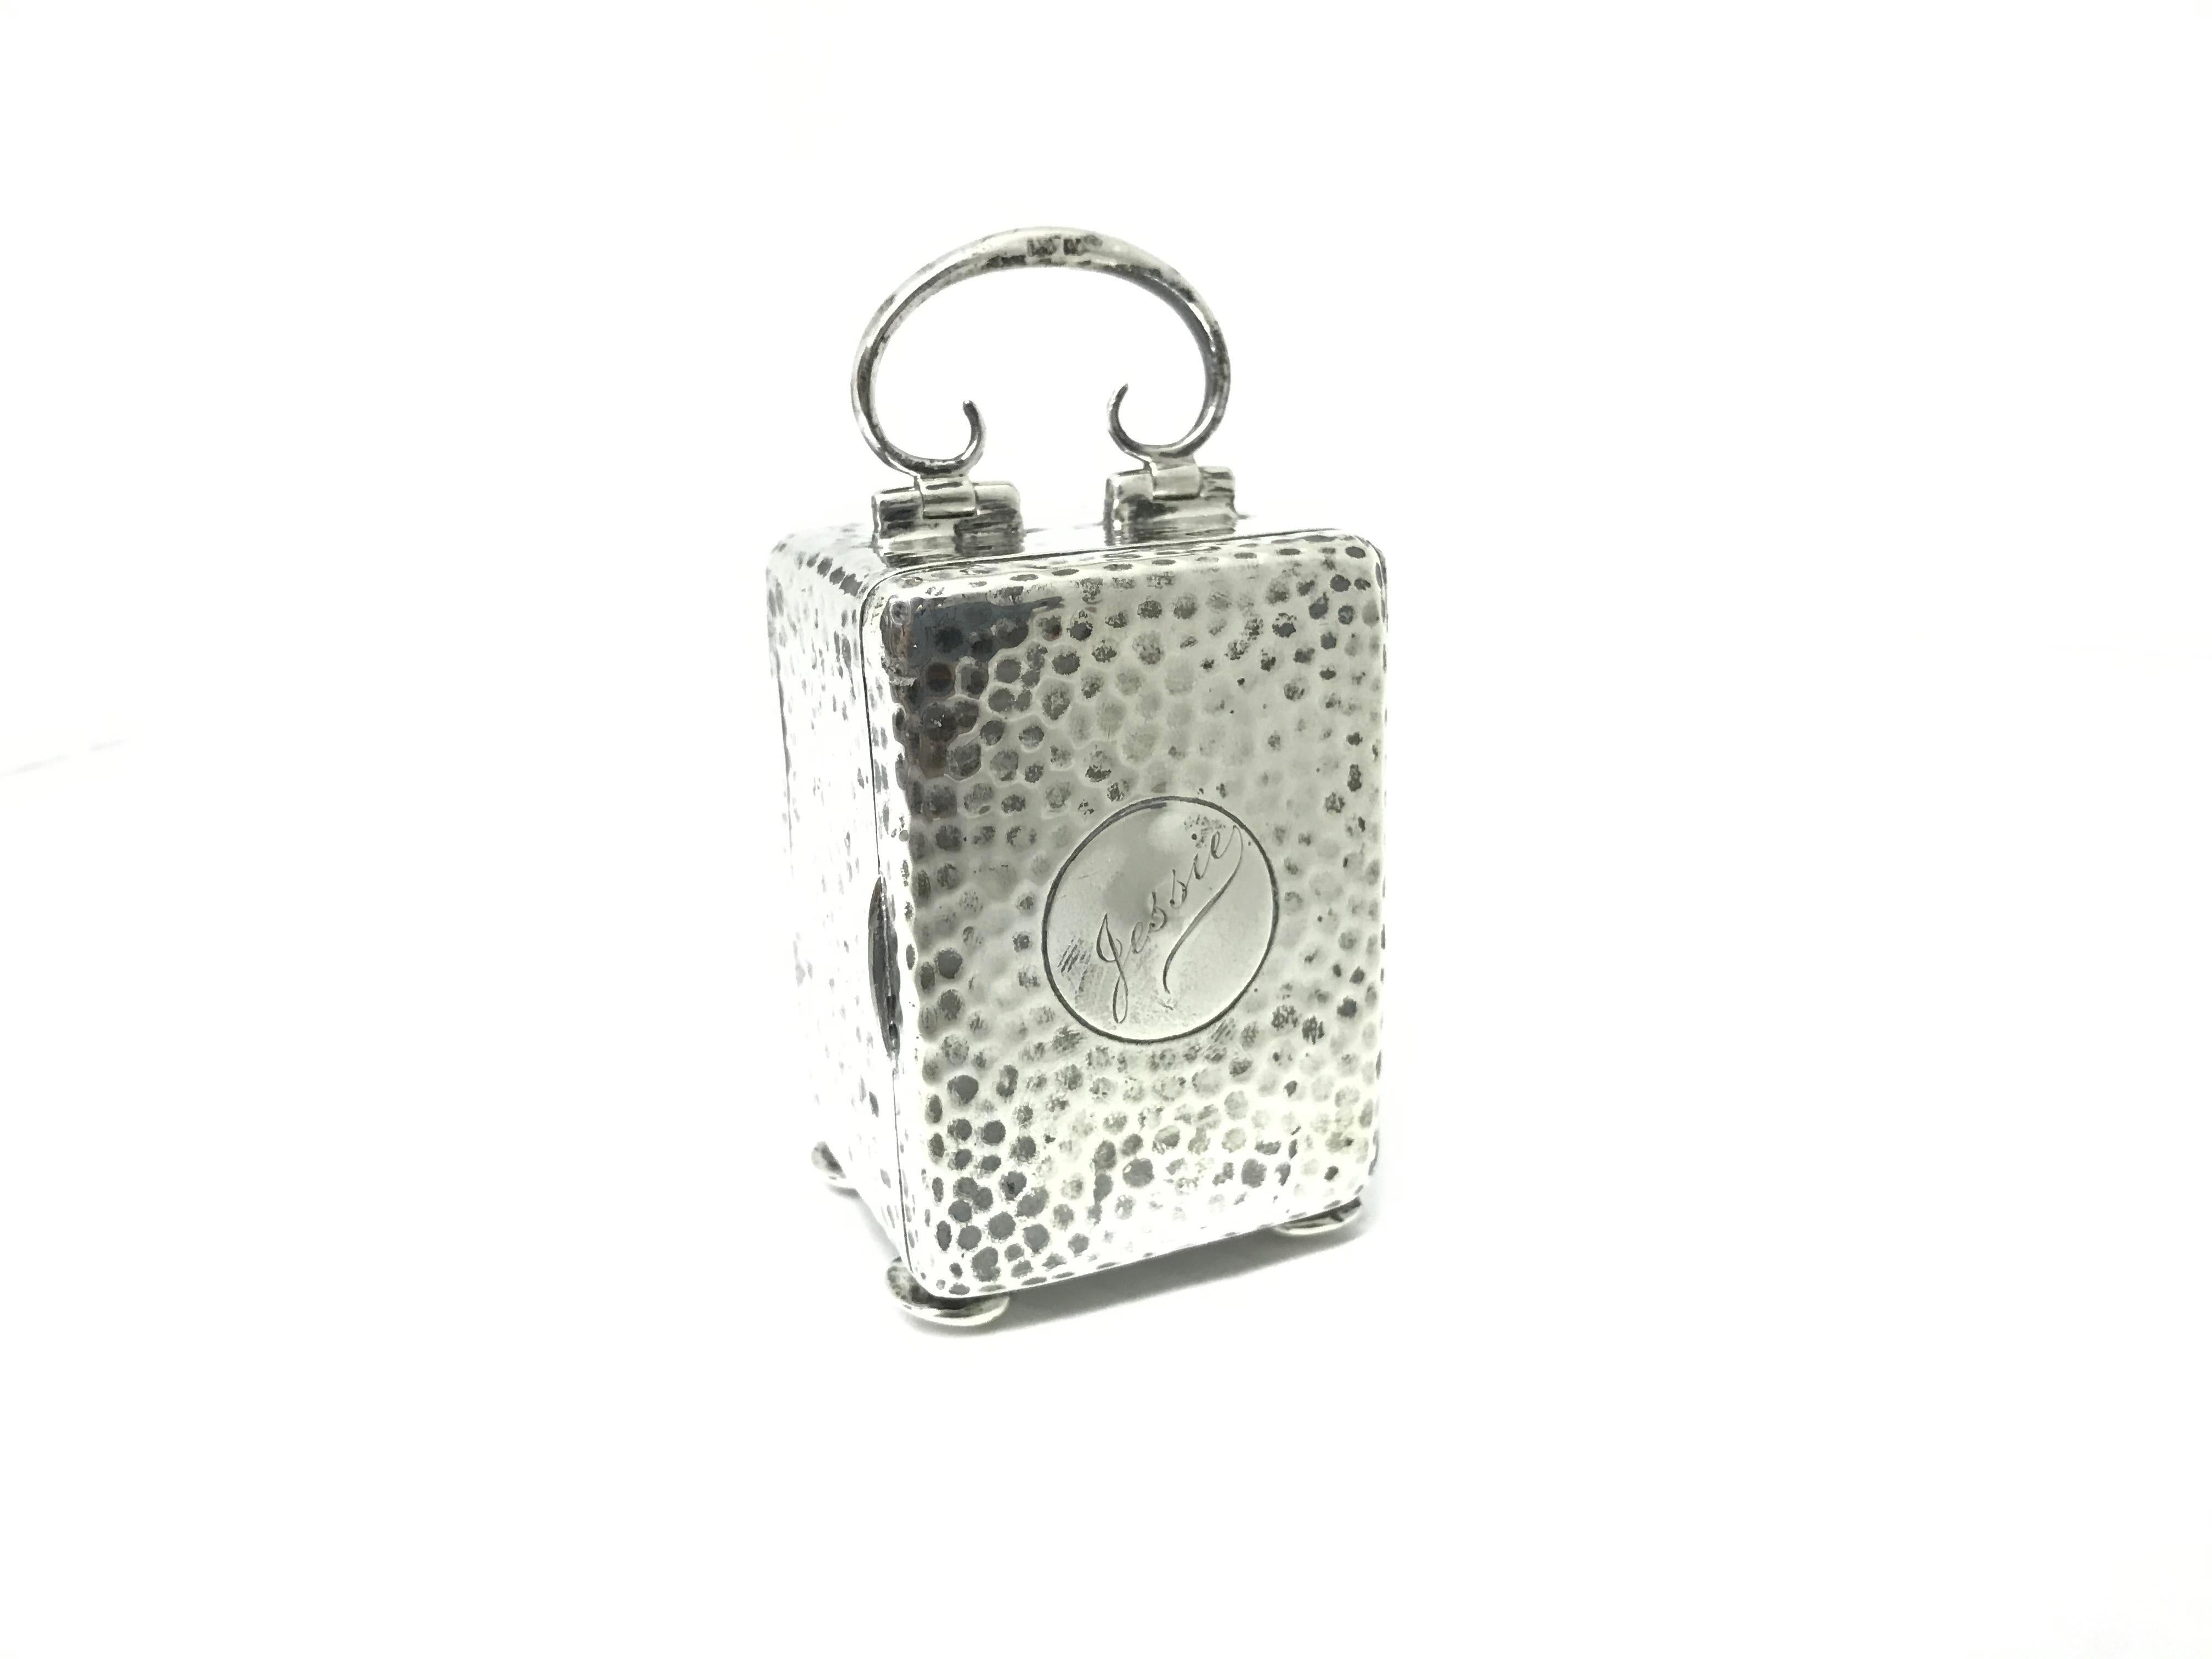 A miniature early 20th century carriage clock in a sterling silver hammered case.
The case is English and hallmarked Birmingham, 1903. The movement was imported
from France which was standard practice in those days. It has and 8-day timepiece